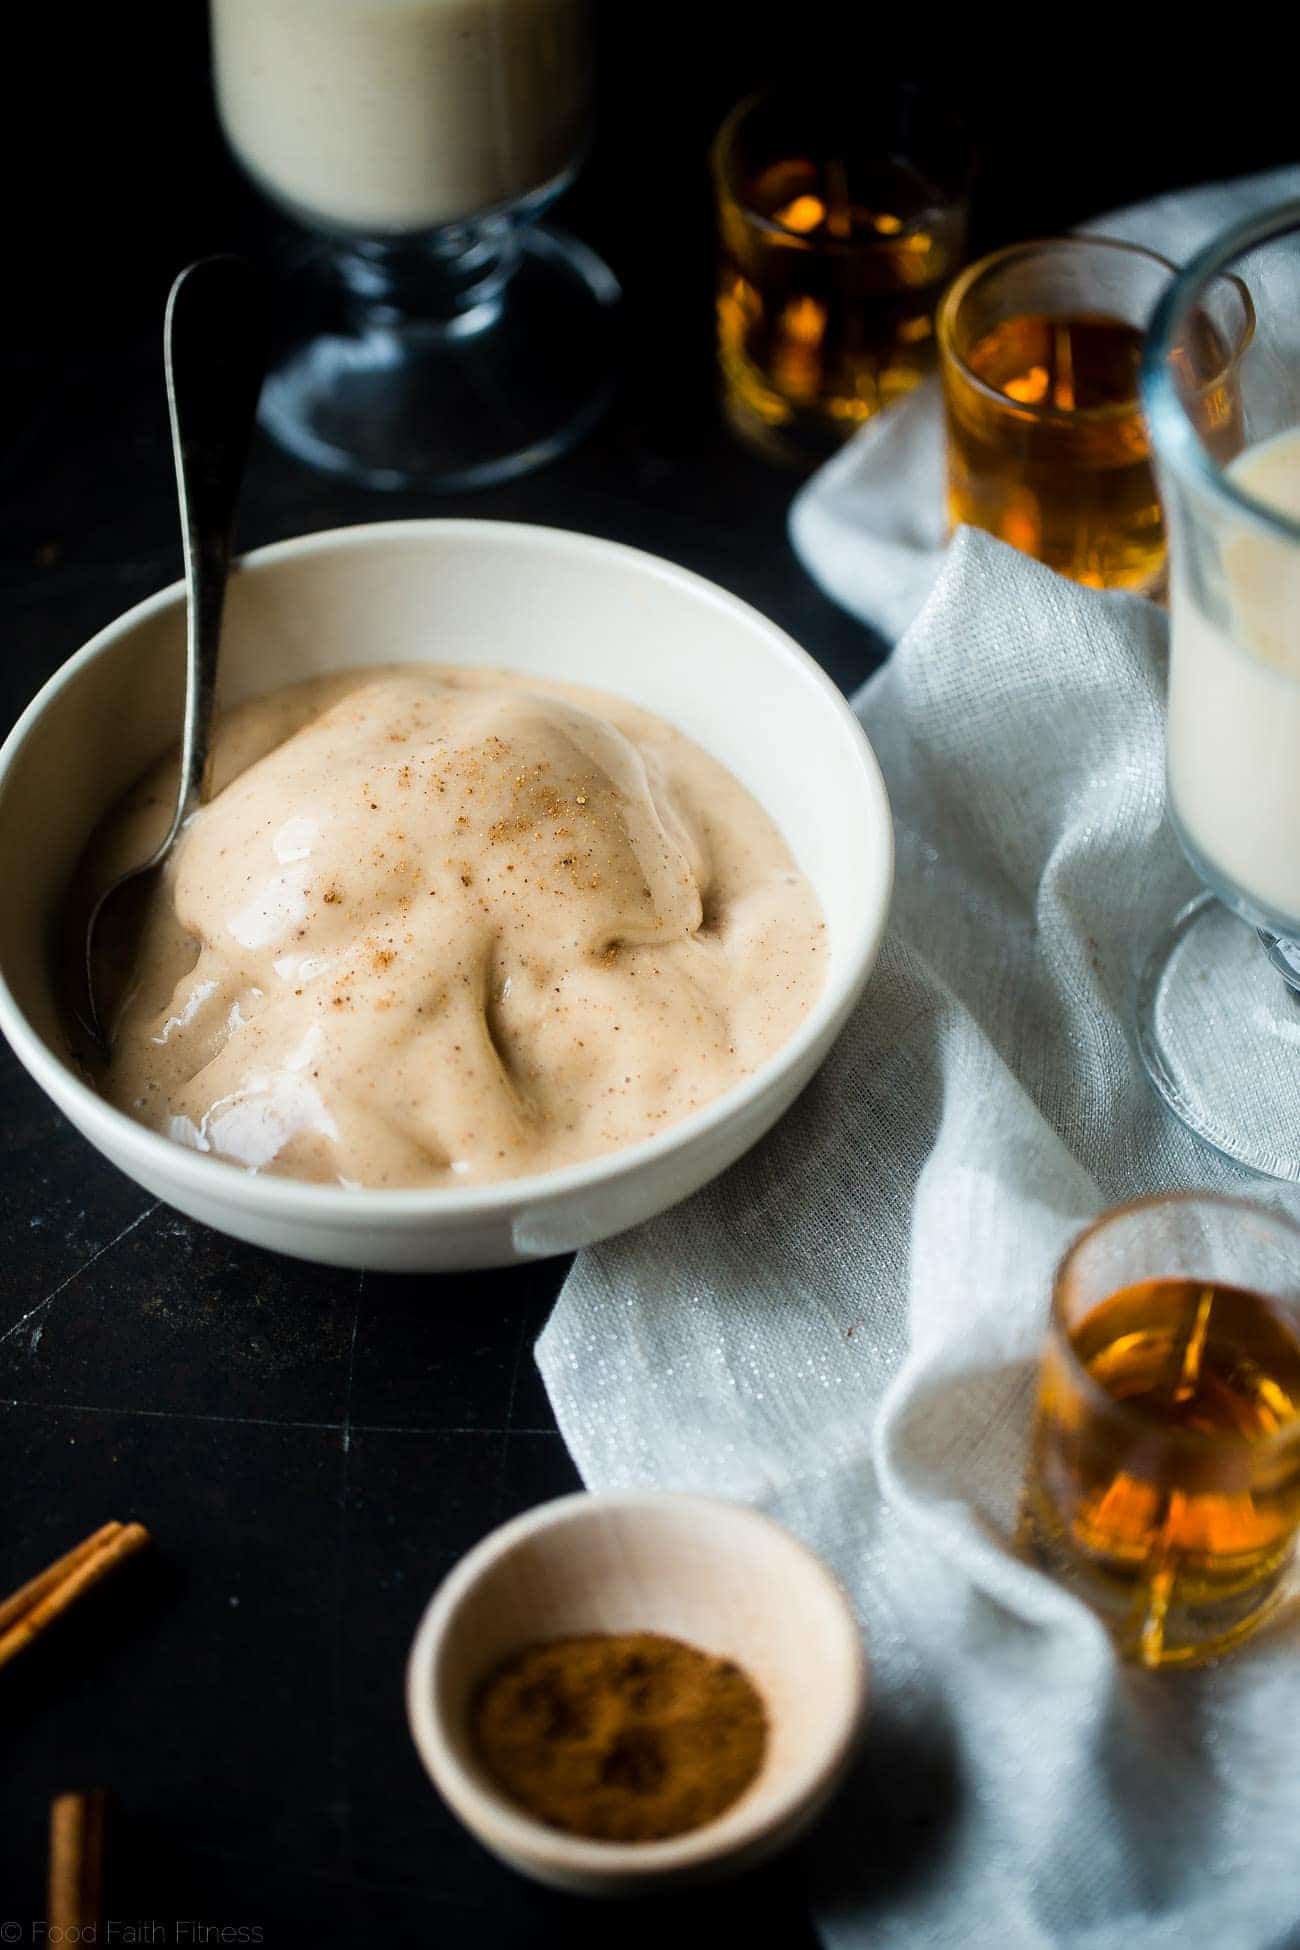 Vegan Rum and "Egg Nog" Ice Cream - This creamy, coconut milk ice cream tastes like frosty version of drinking a rum and eggnog...without the dairy or eggs! It's a healthy treat for the holidays! | Foodfaithfitness.com | @FoodFaithFit